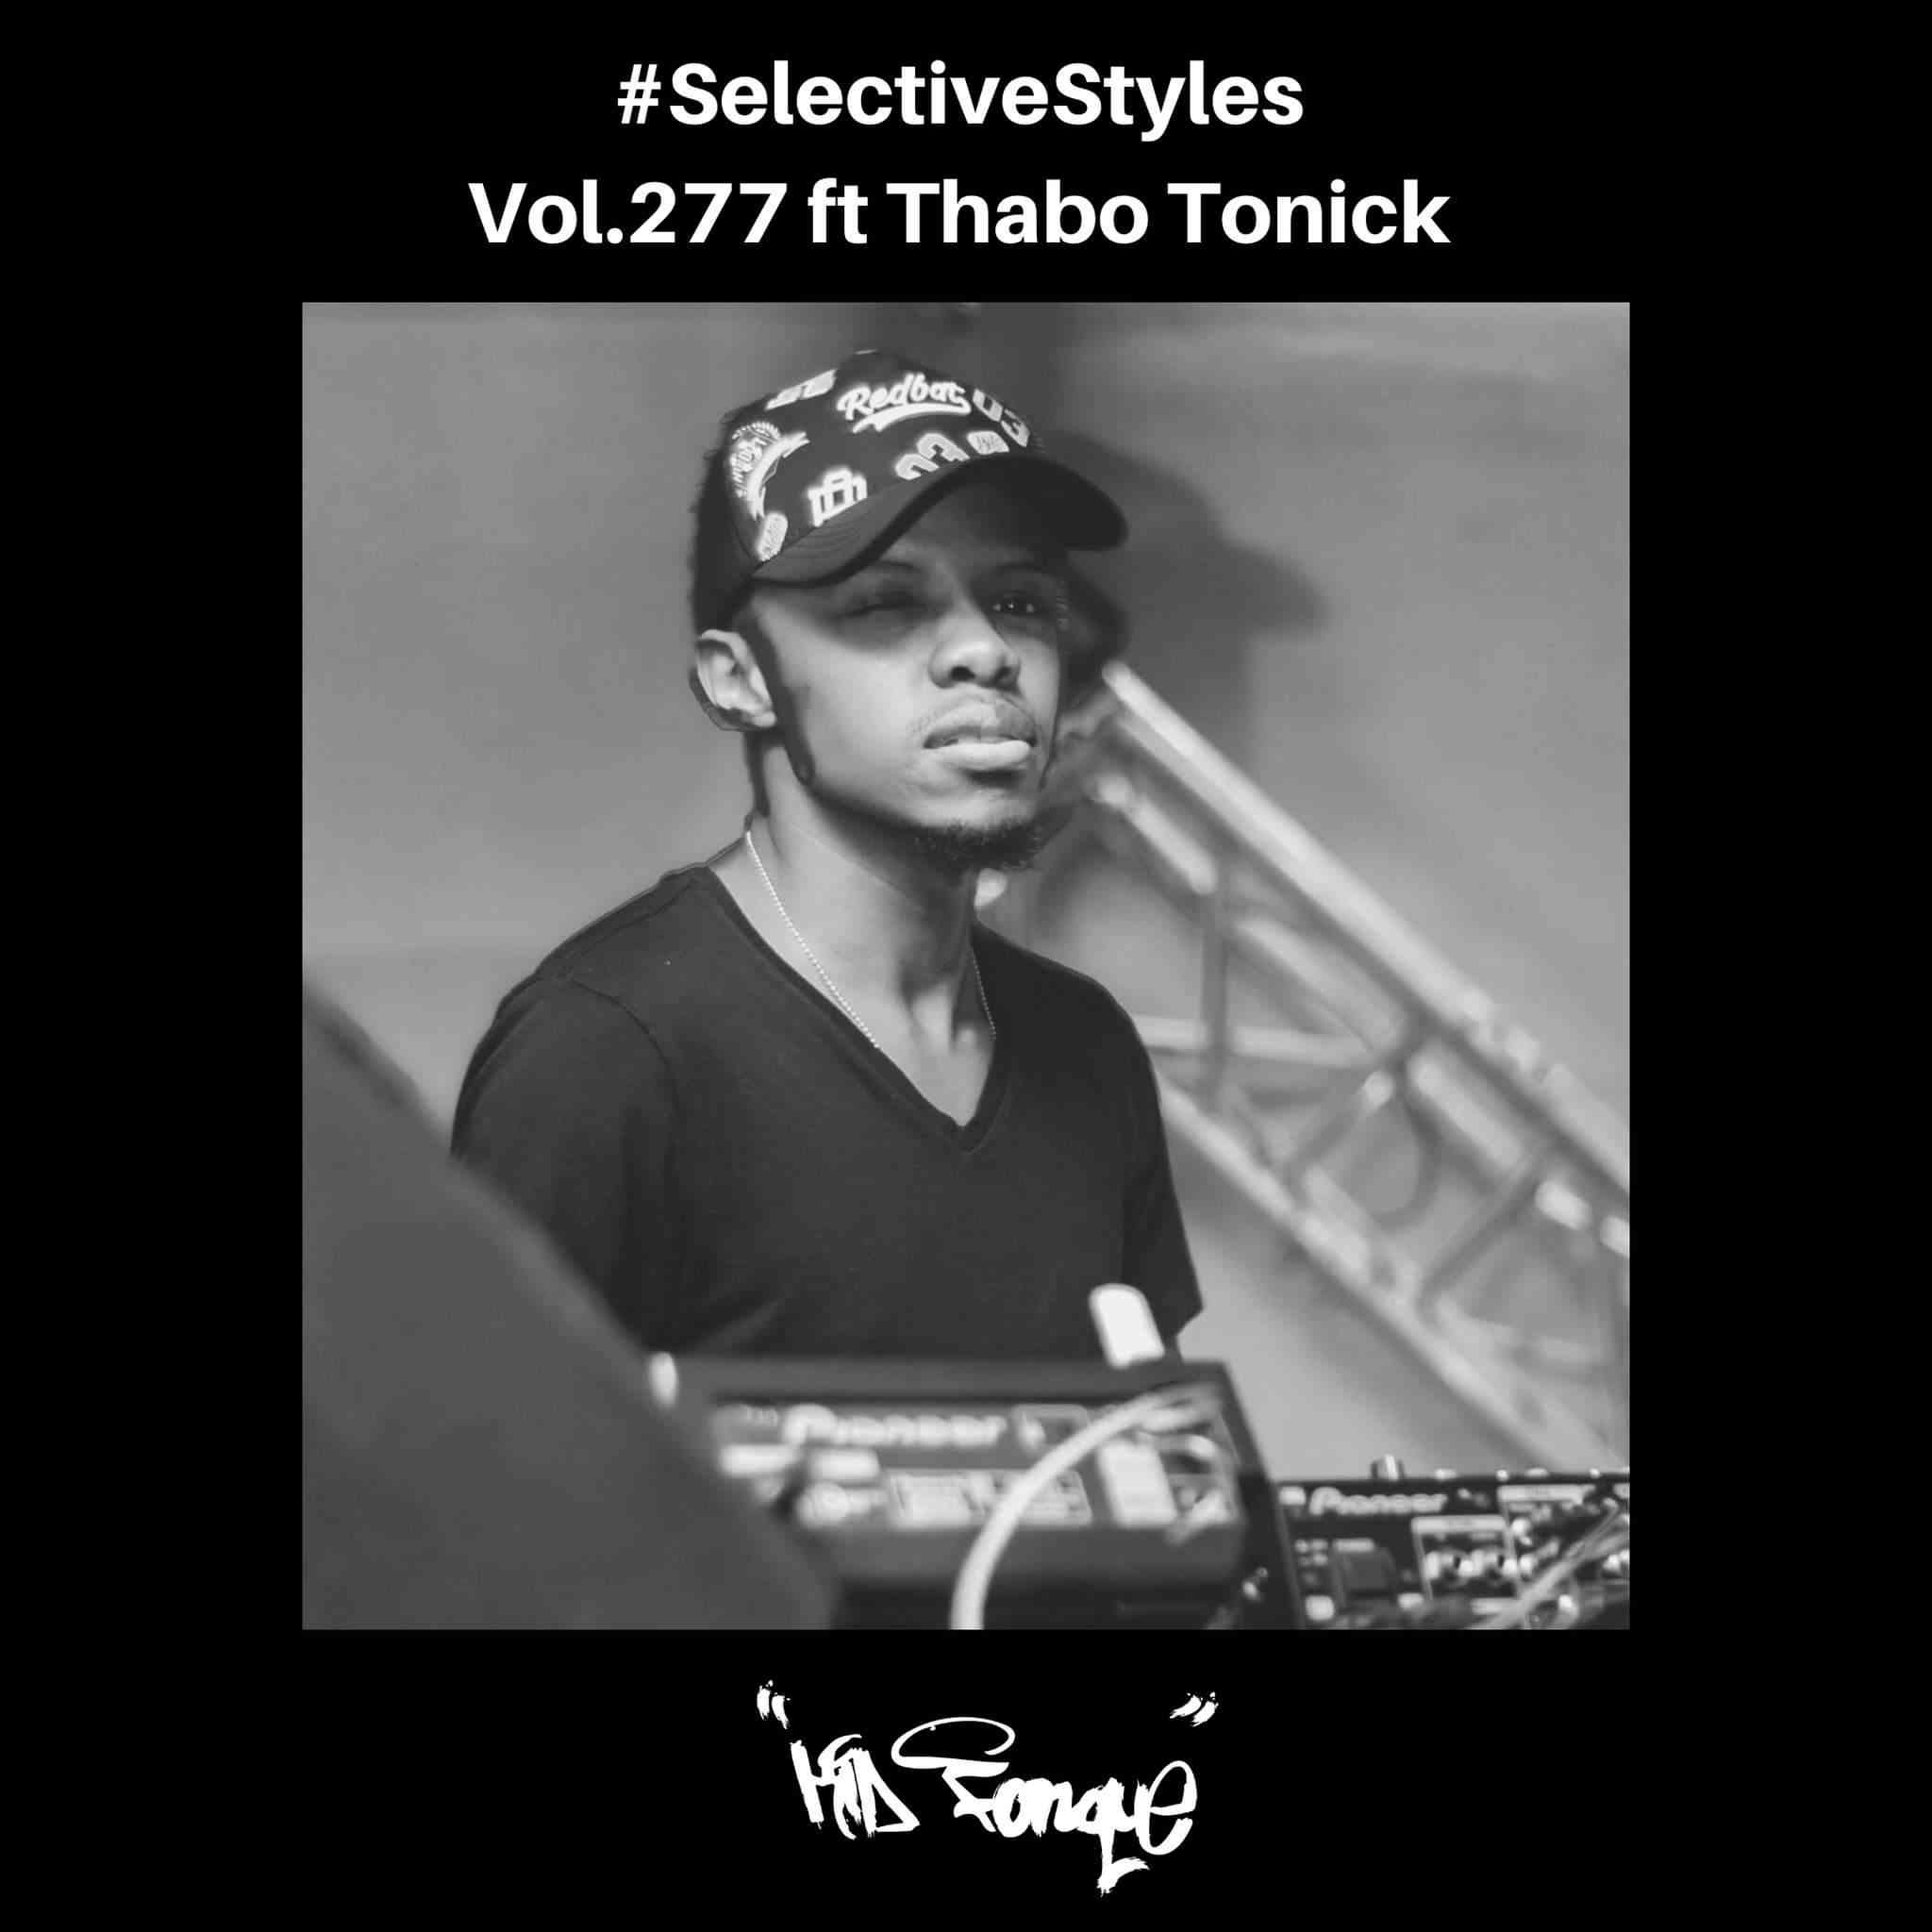 Kid Fonque & Thabo Tonick - Selective Styles Vol.277 Mix